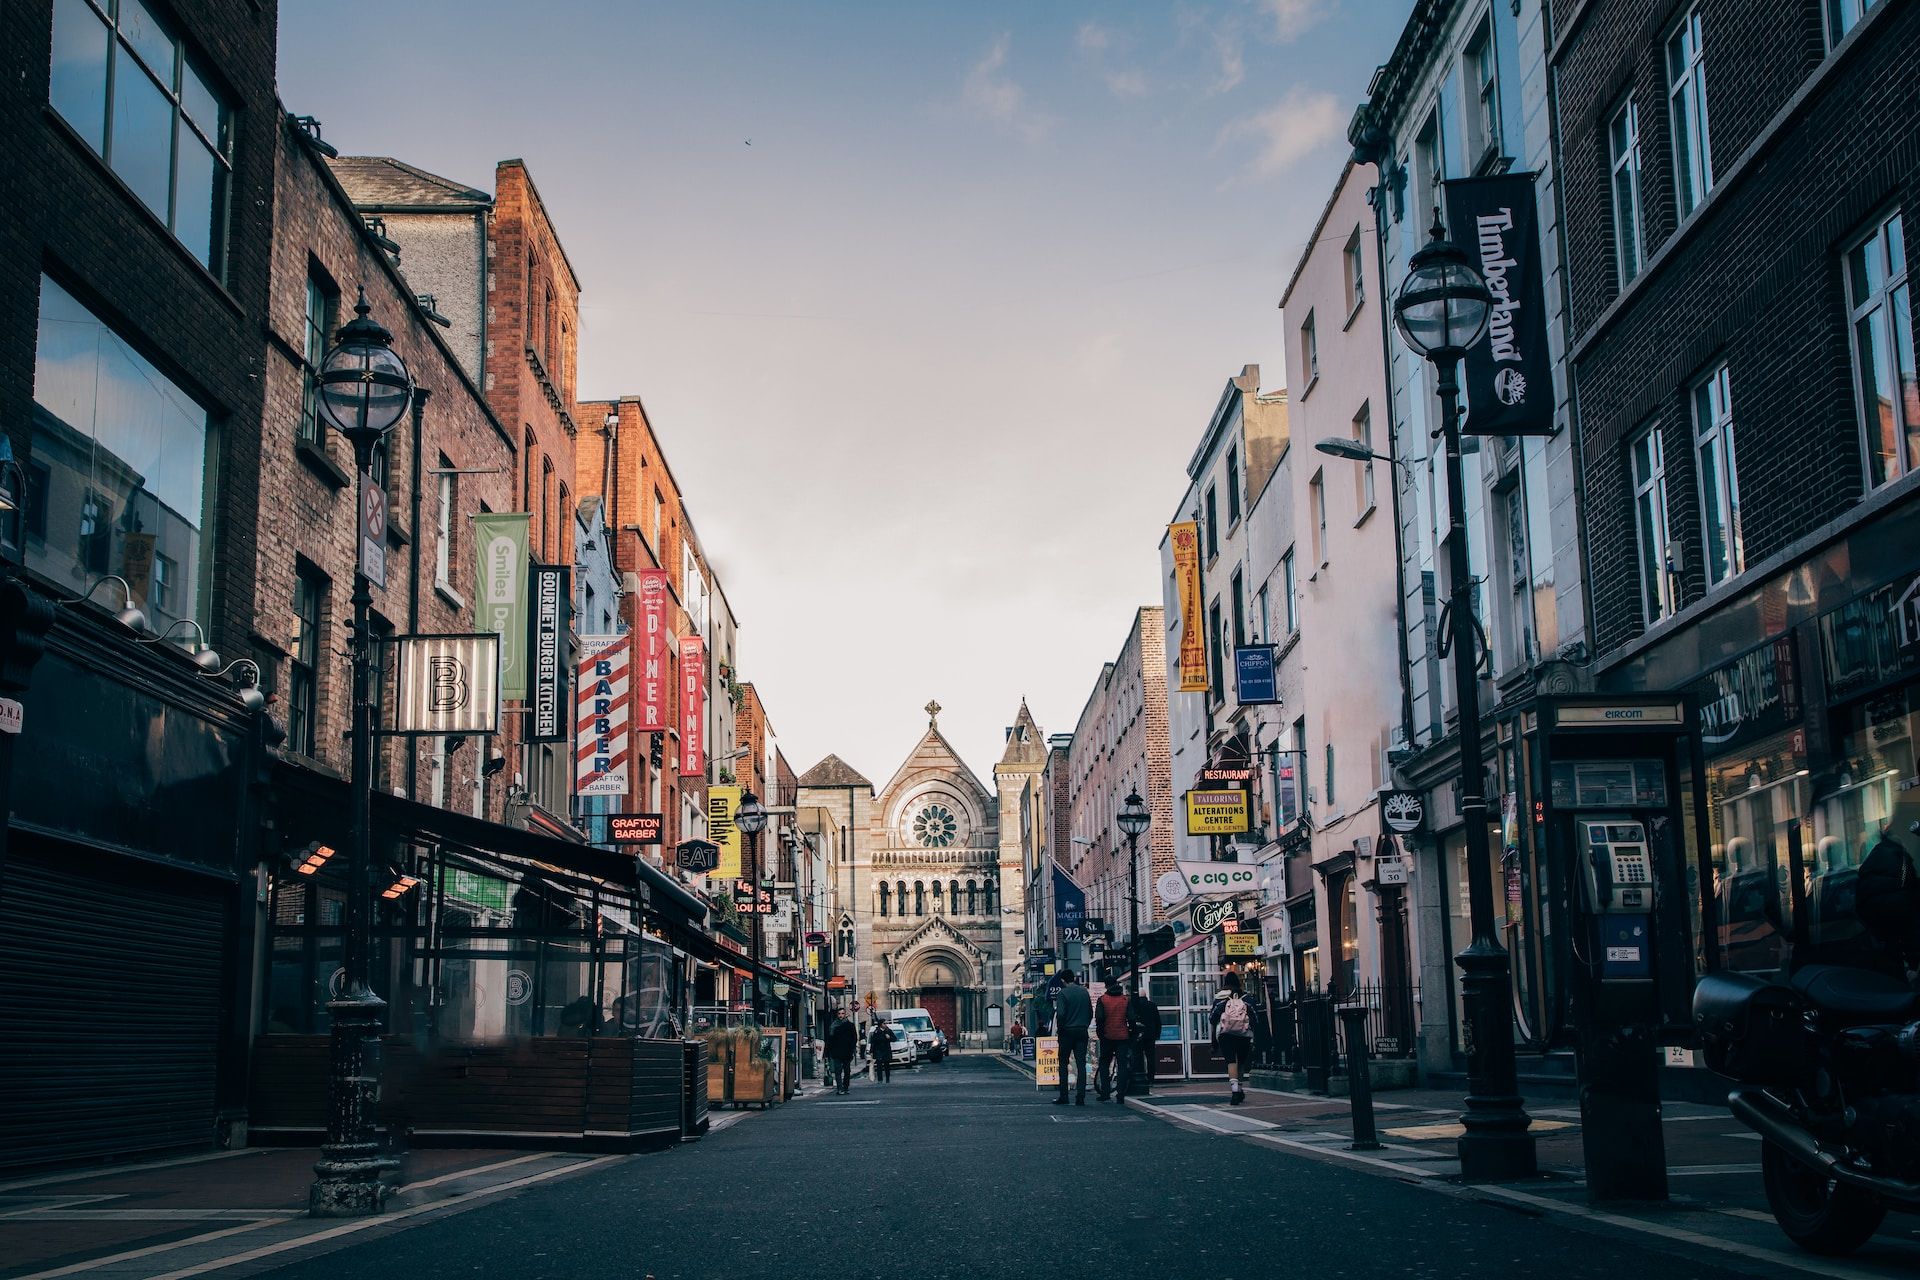 A street lined up with buildings in Dublin, Ireland